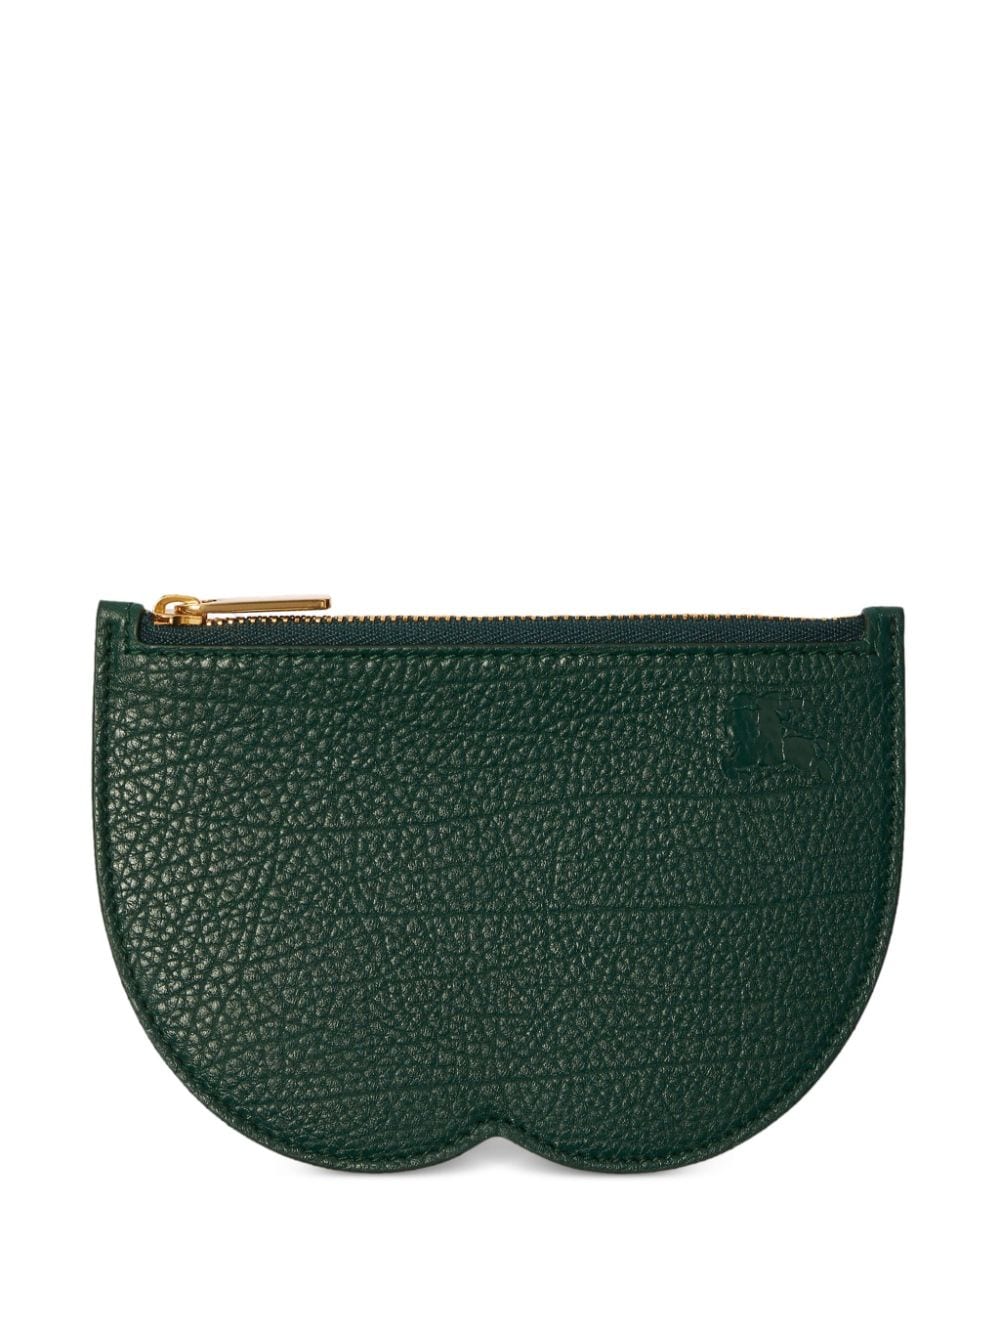 Burberry small Chess leather pouch - Green von Burberry